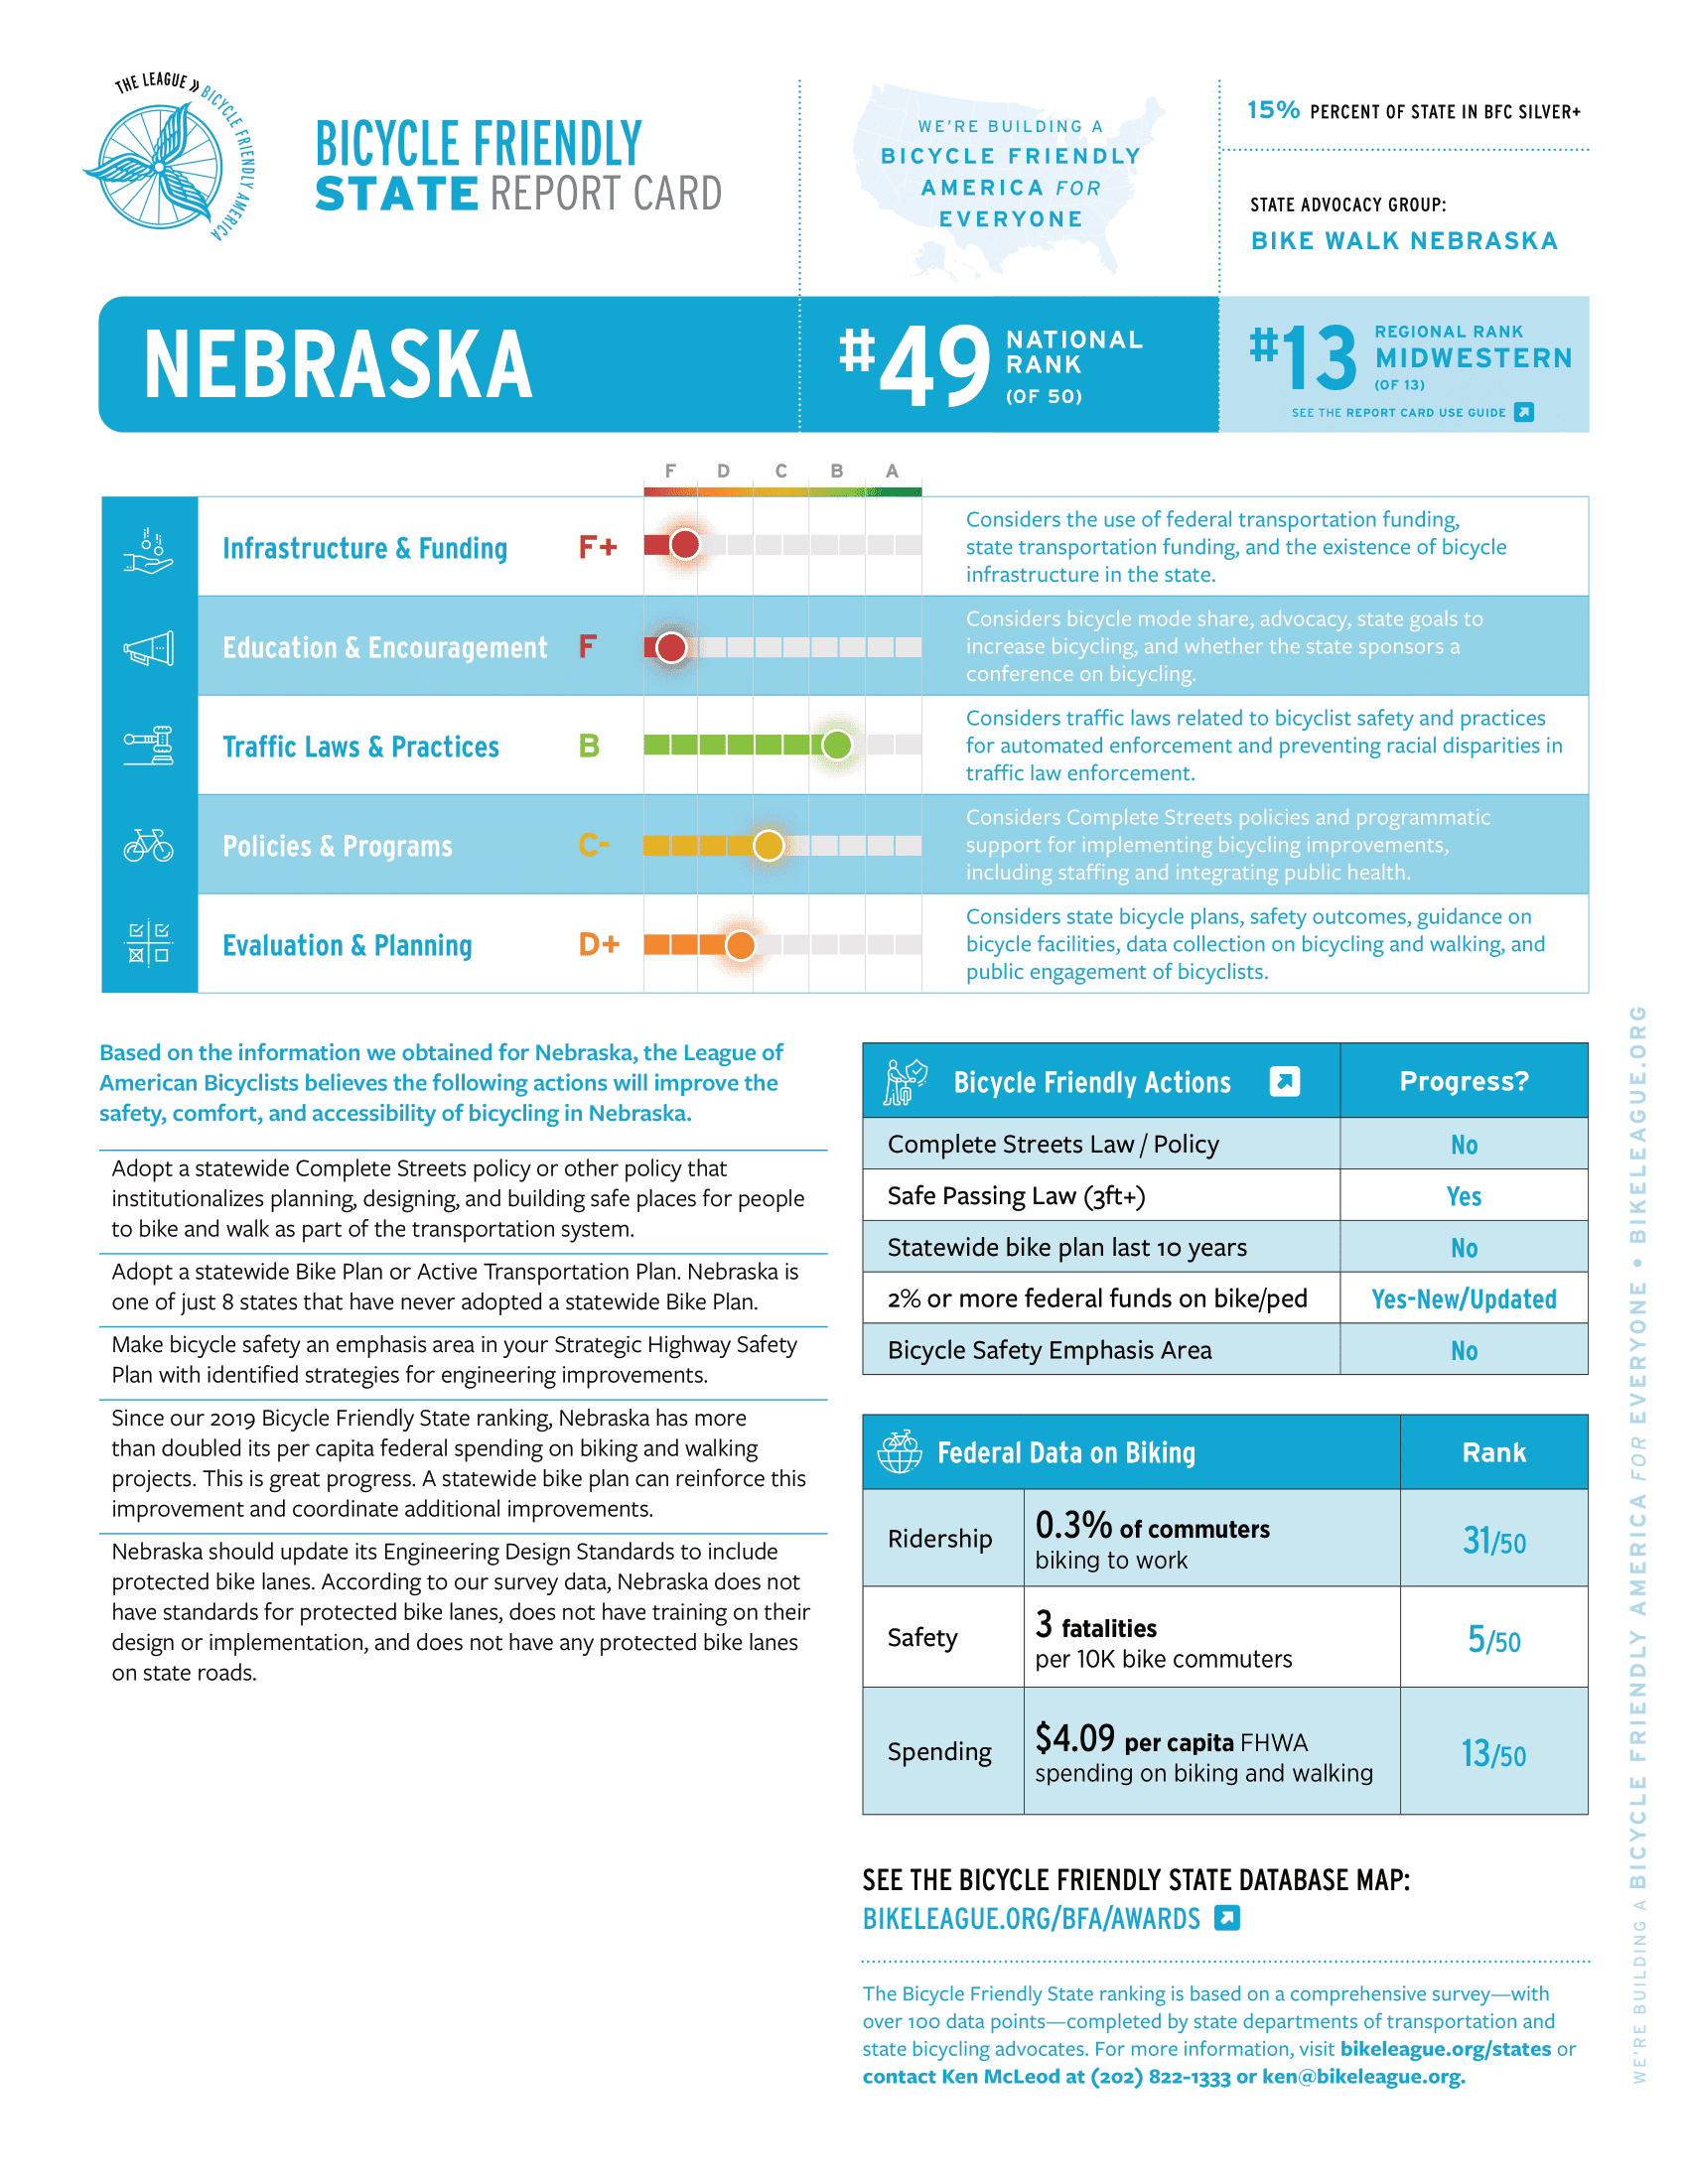 New Bicycle Friendly State Rankings Released